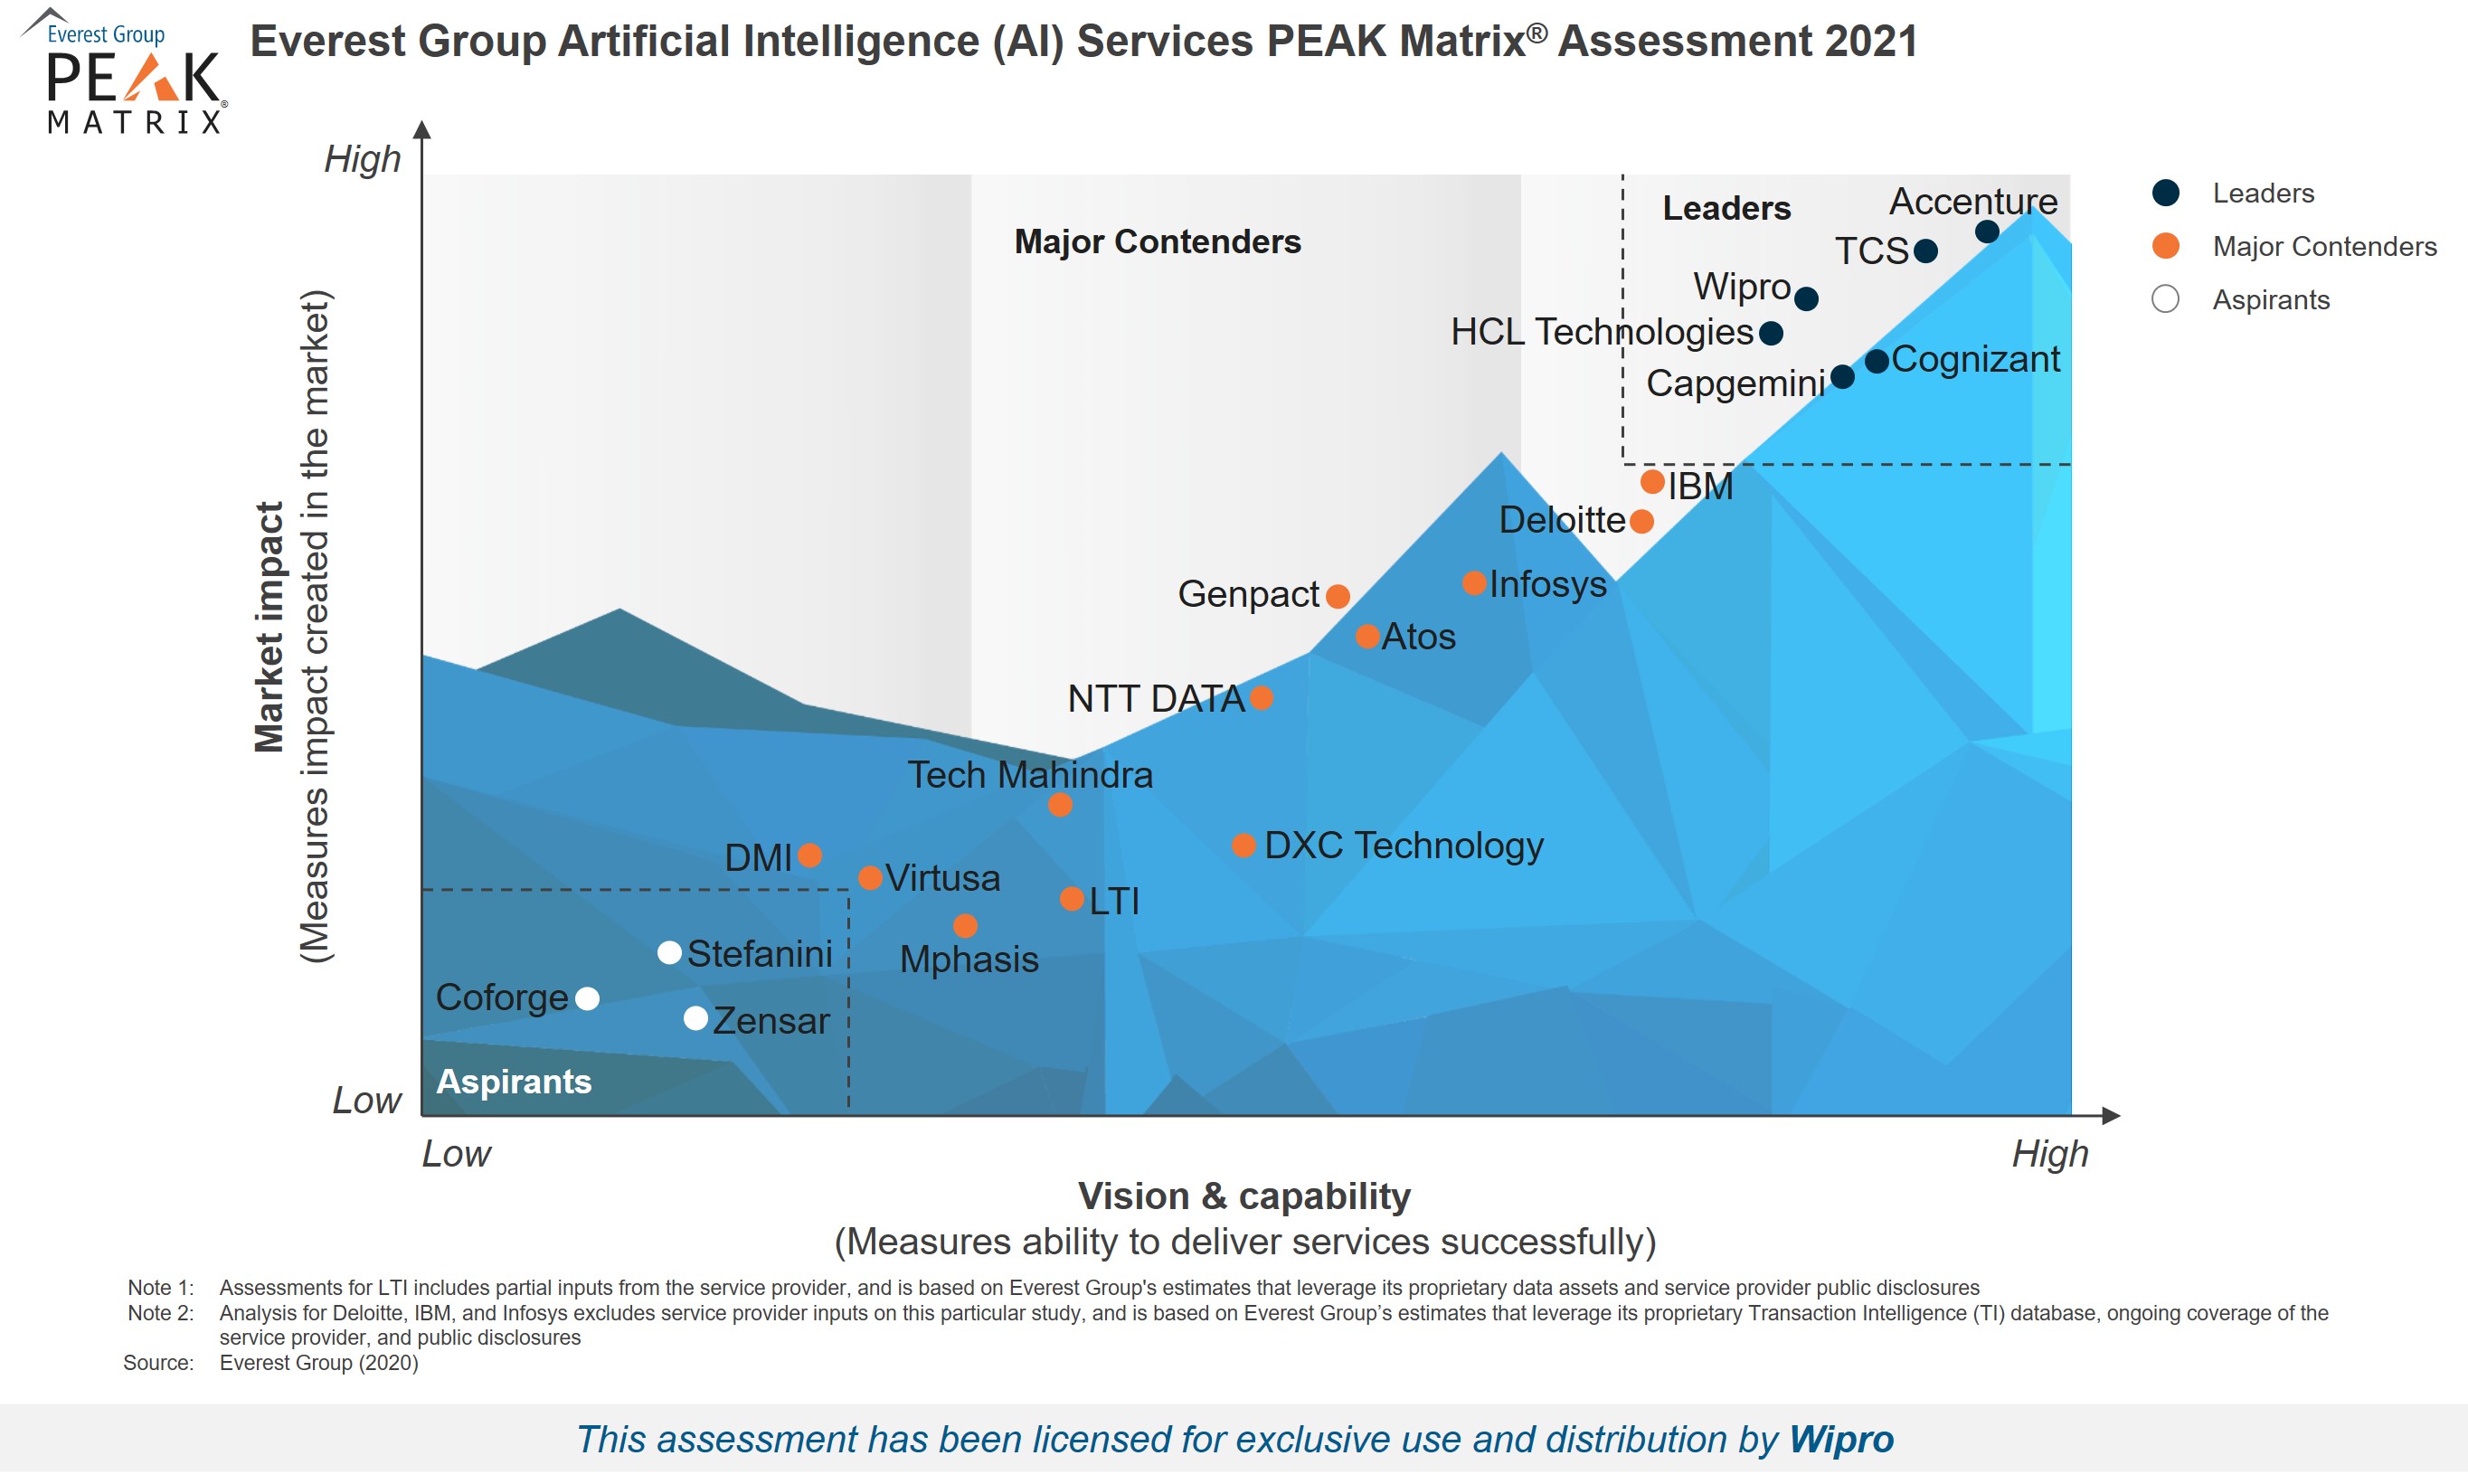 Wipro Holmes Augmented Intelligence: Leader in Everest Group’s PEAK Matrix® for AI Service Providers 2021